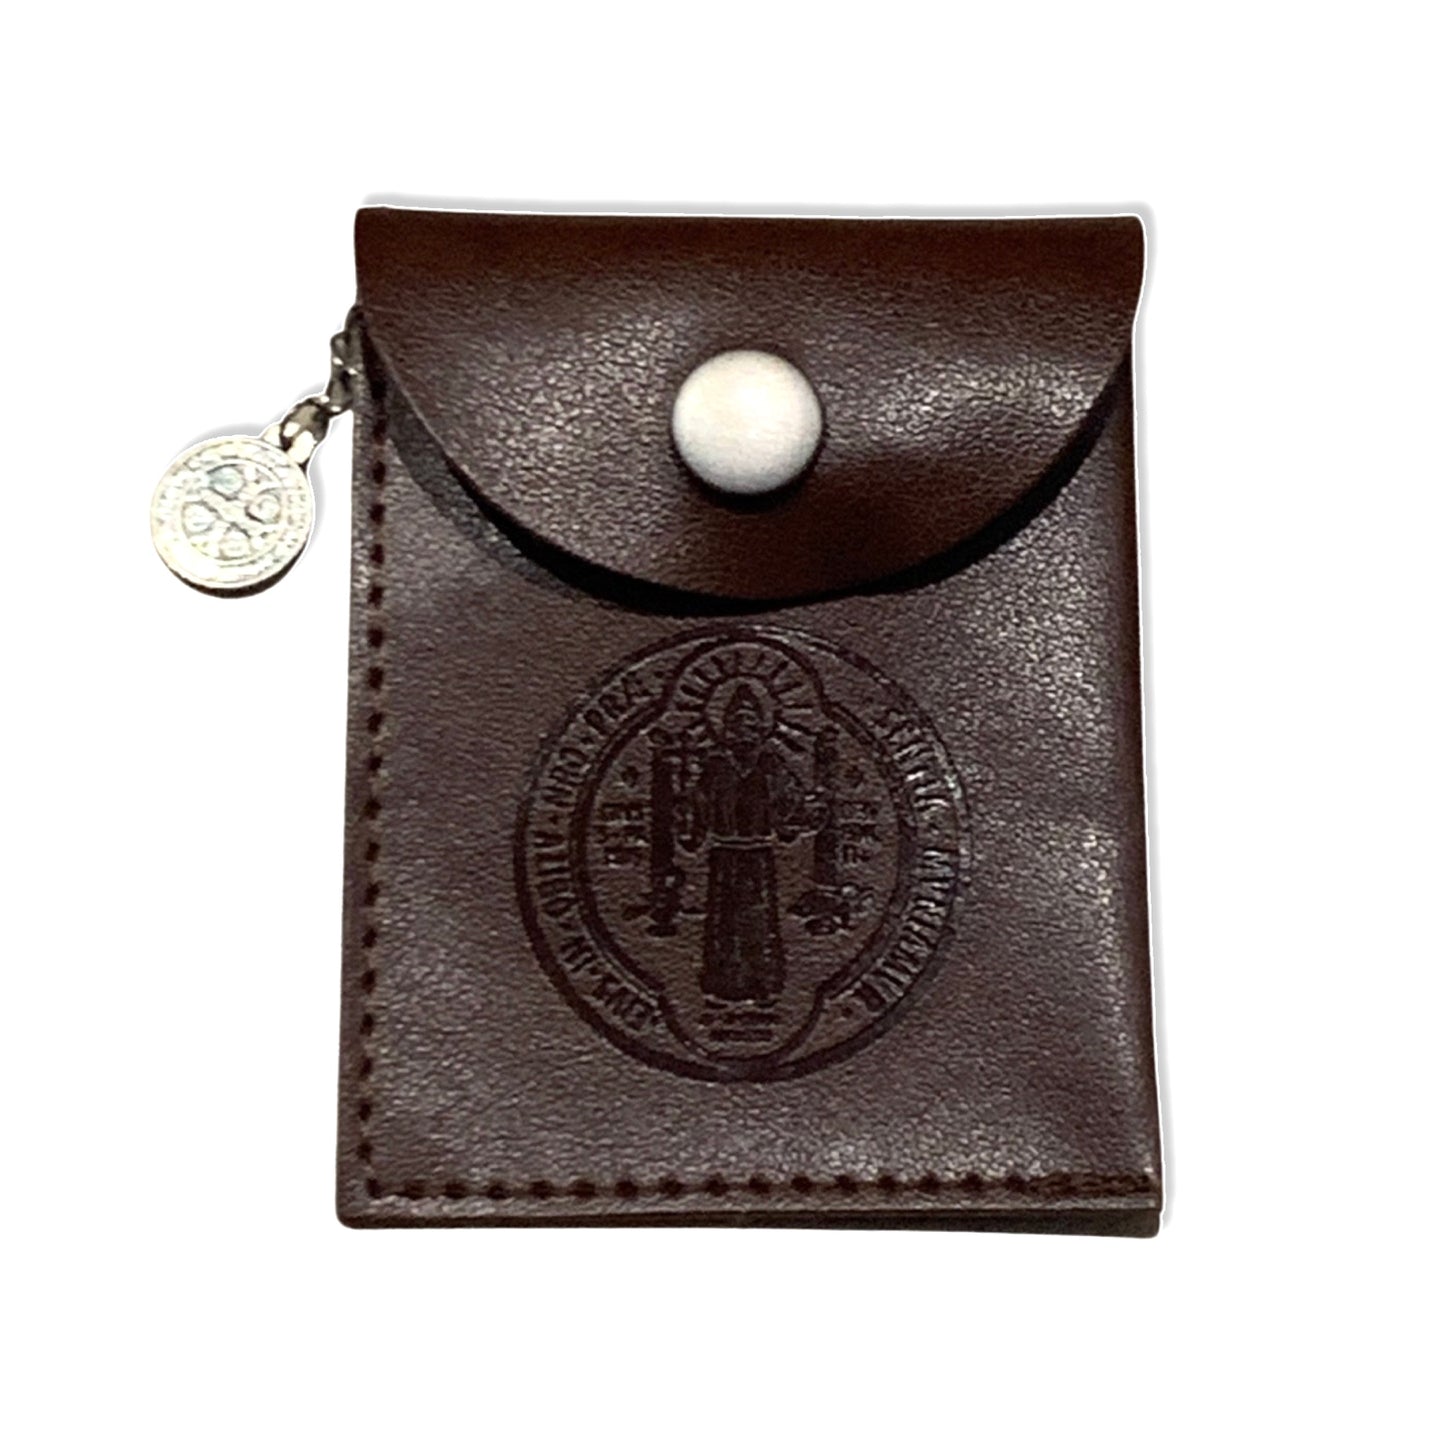 St. Benedict Imitation Leather Pouch